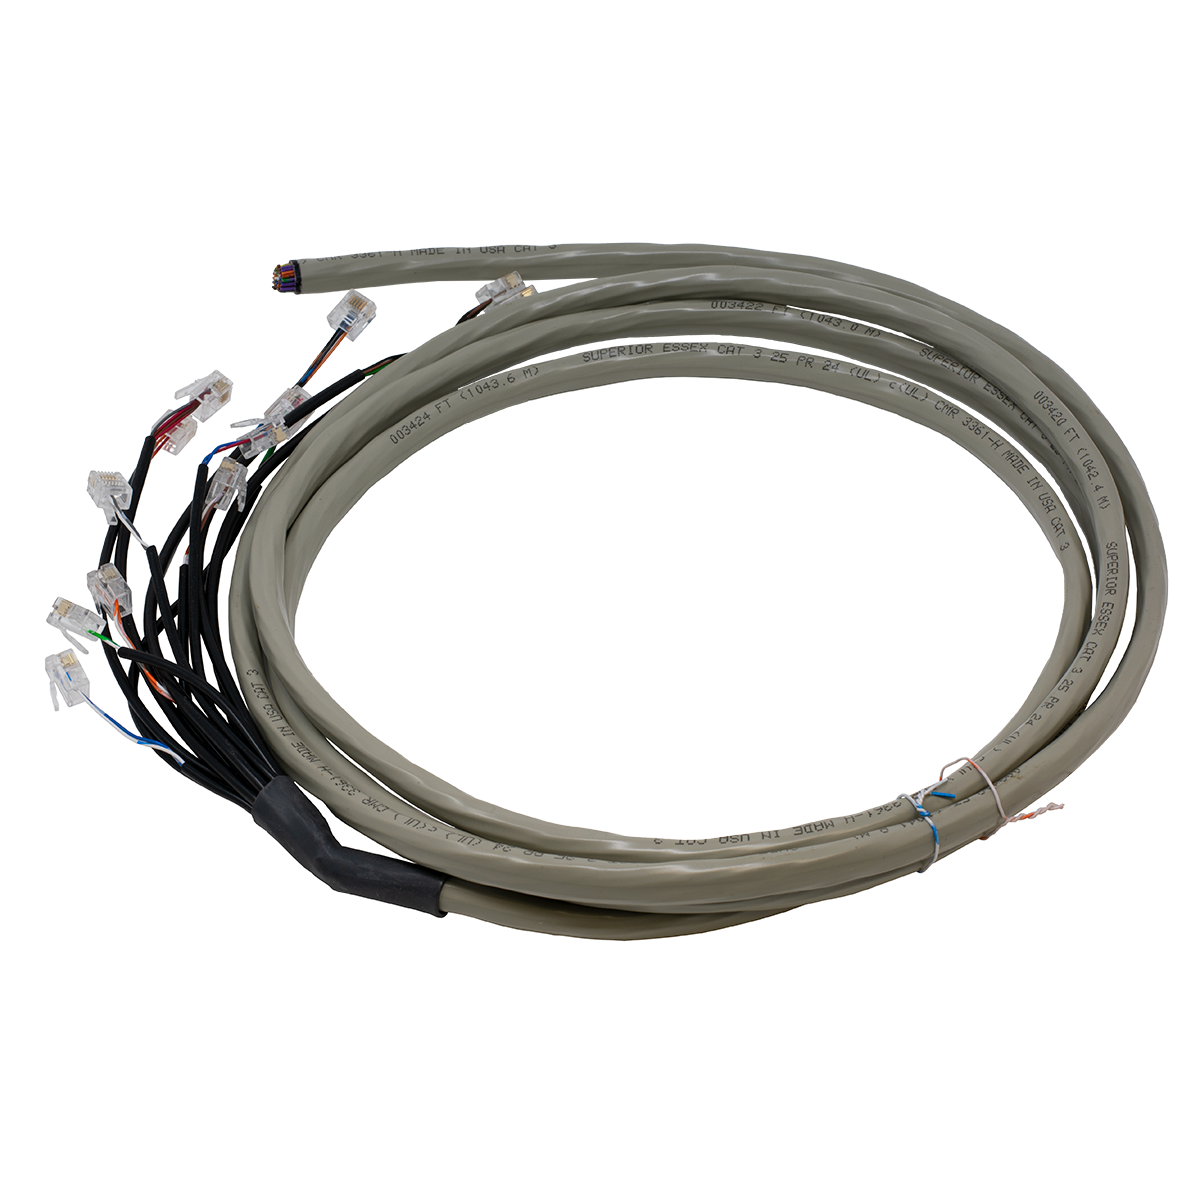 QWIK 10' Mitel 3300 Analog Chassis Cable